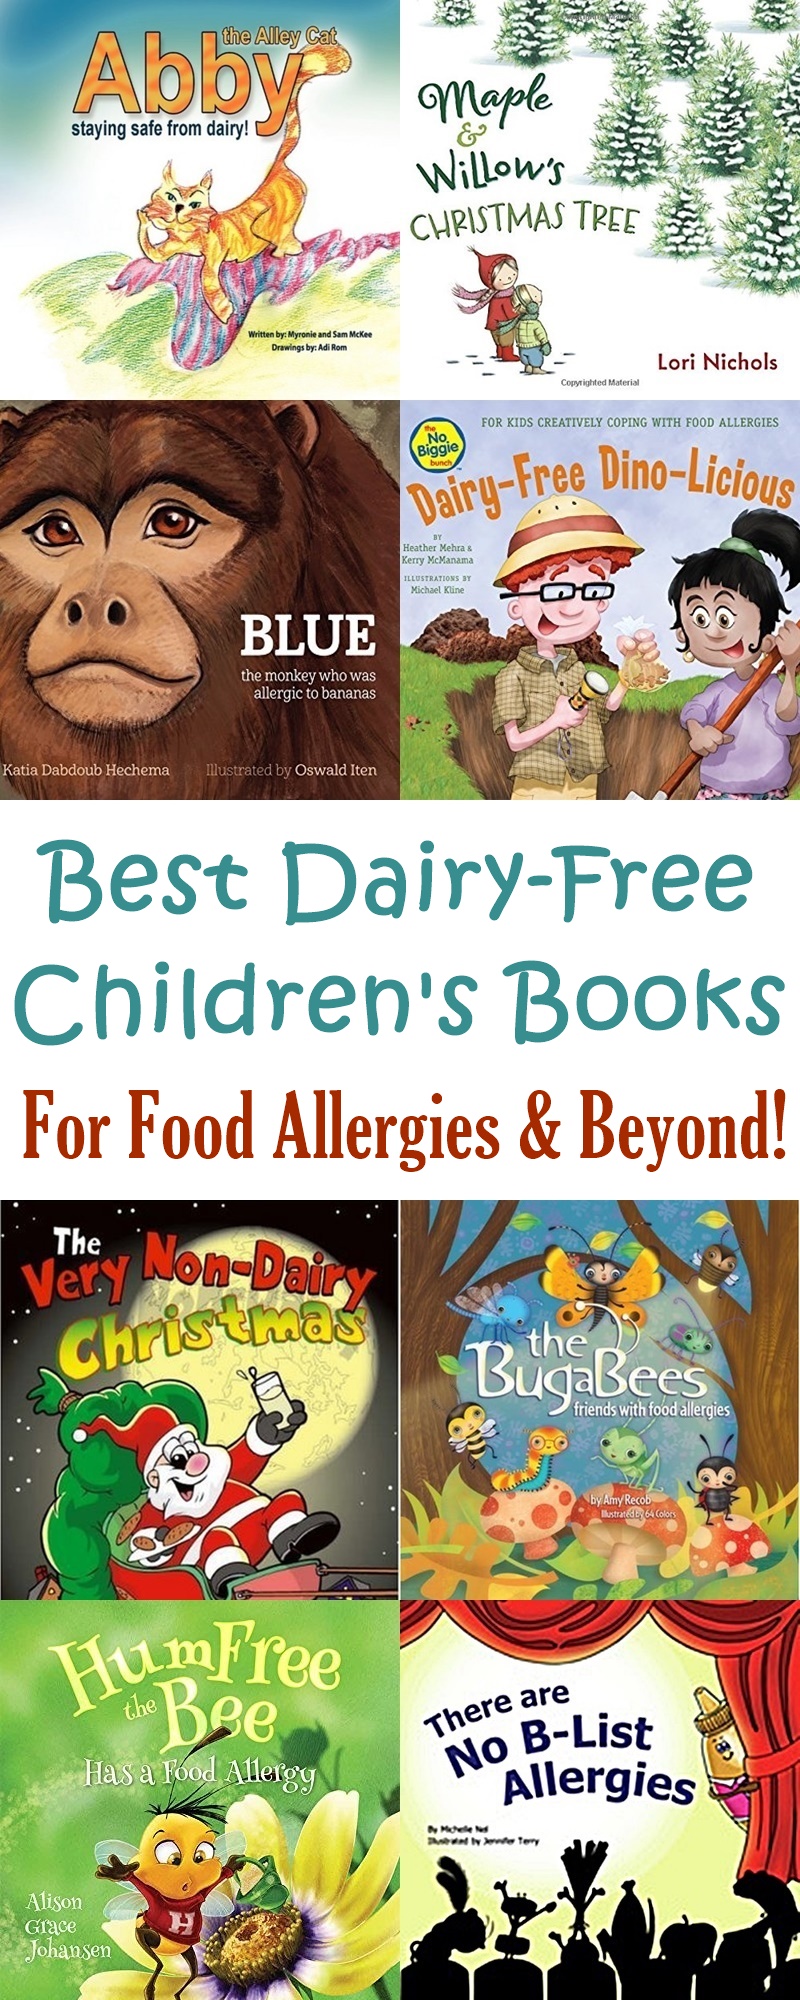 The Best Dairy-Free Children's Books for Food Allergies & Beyond